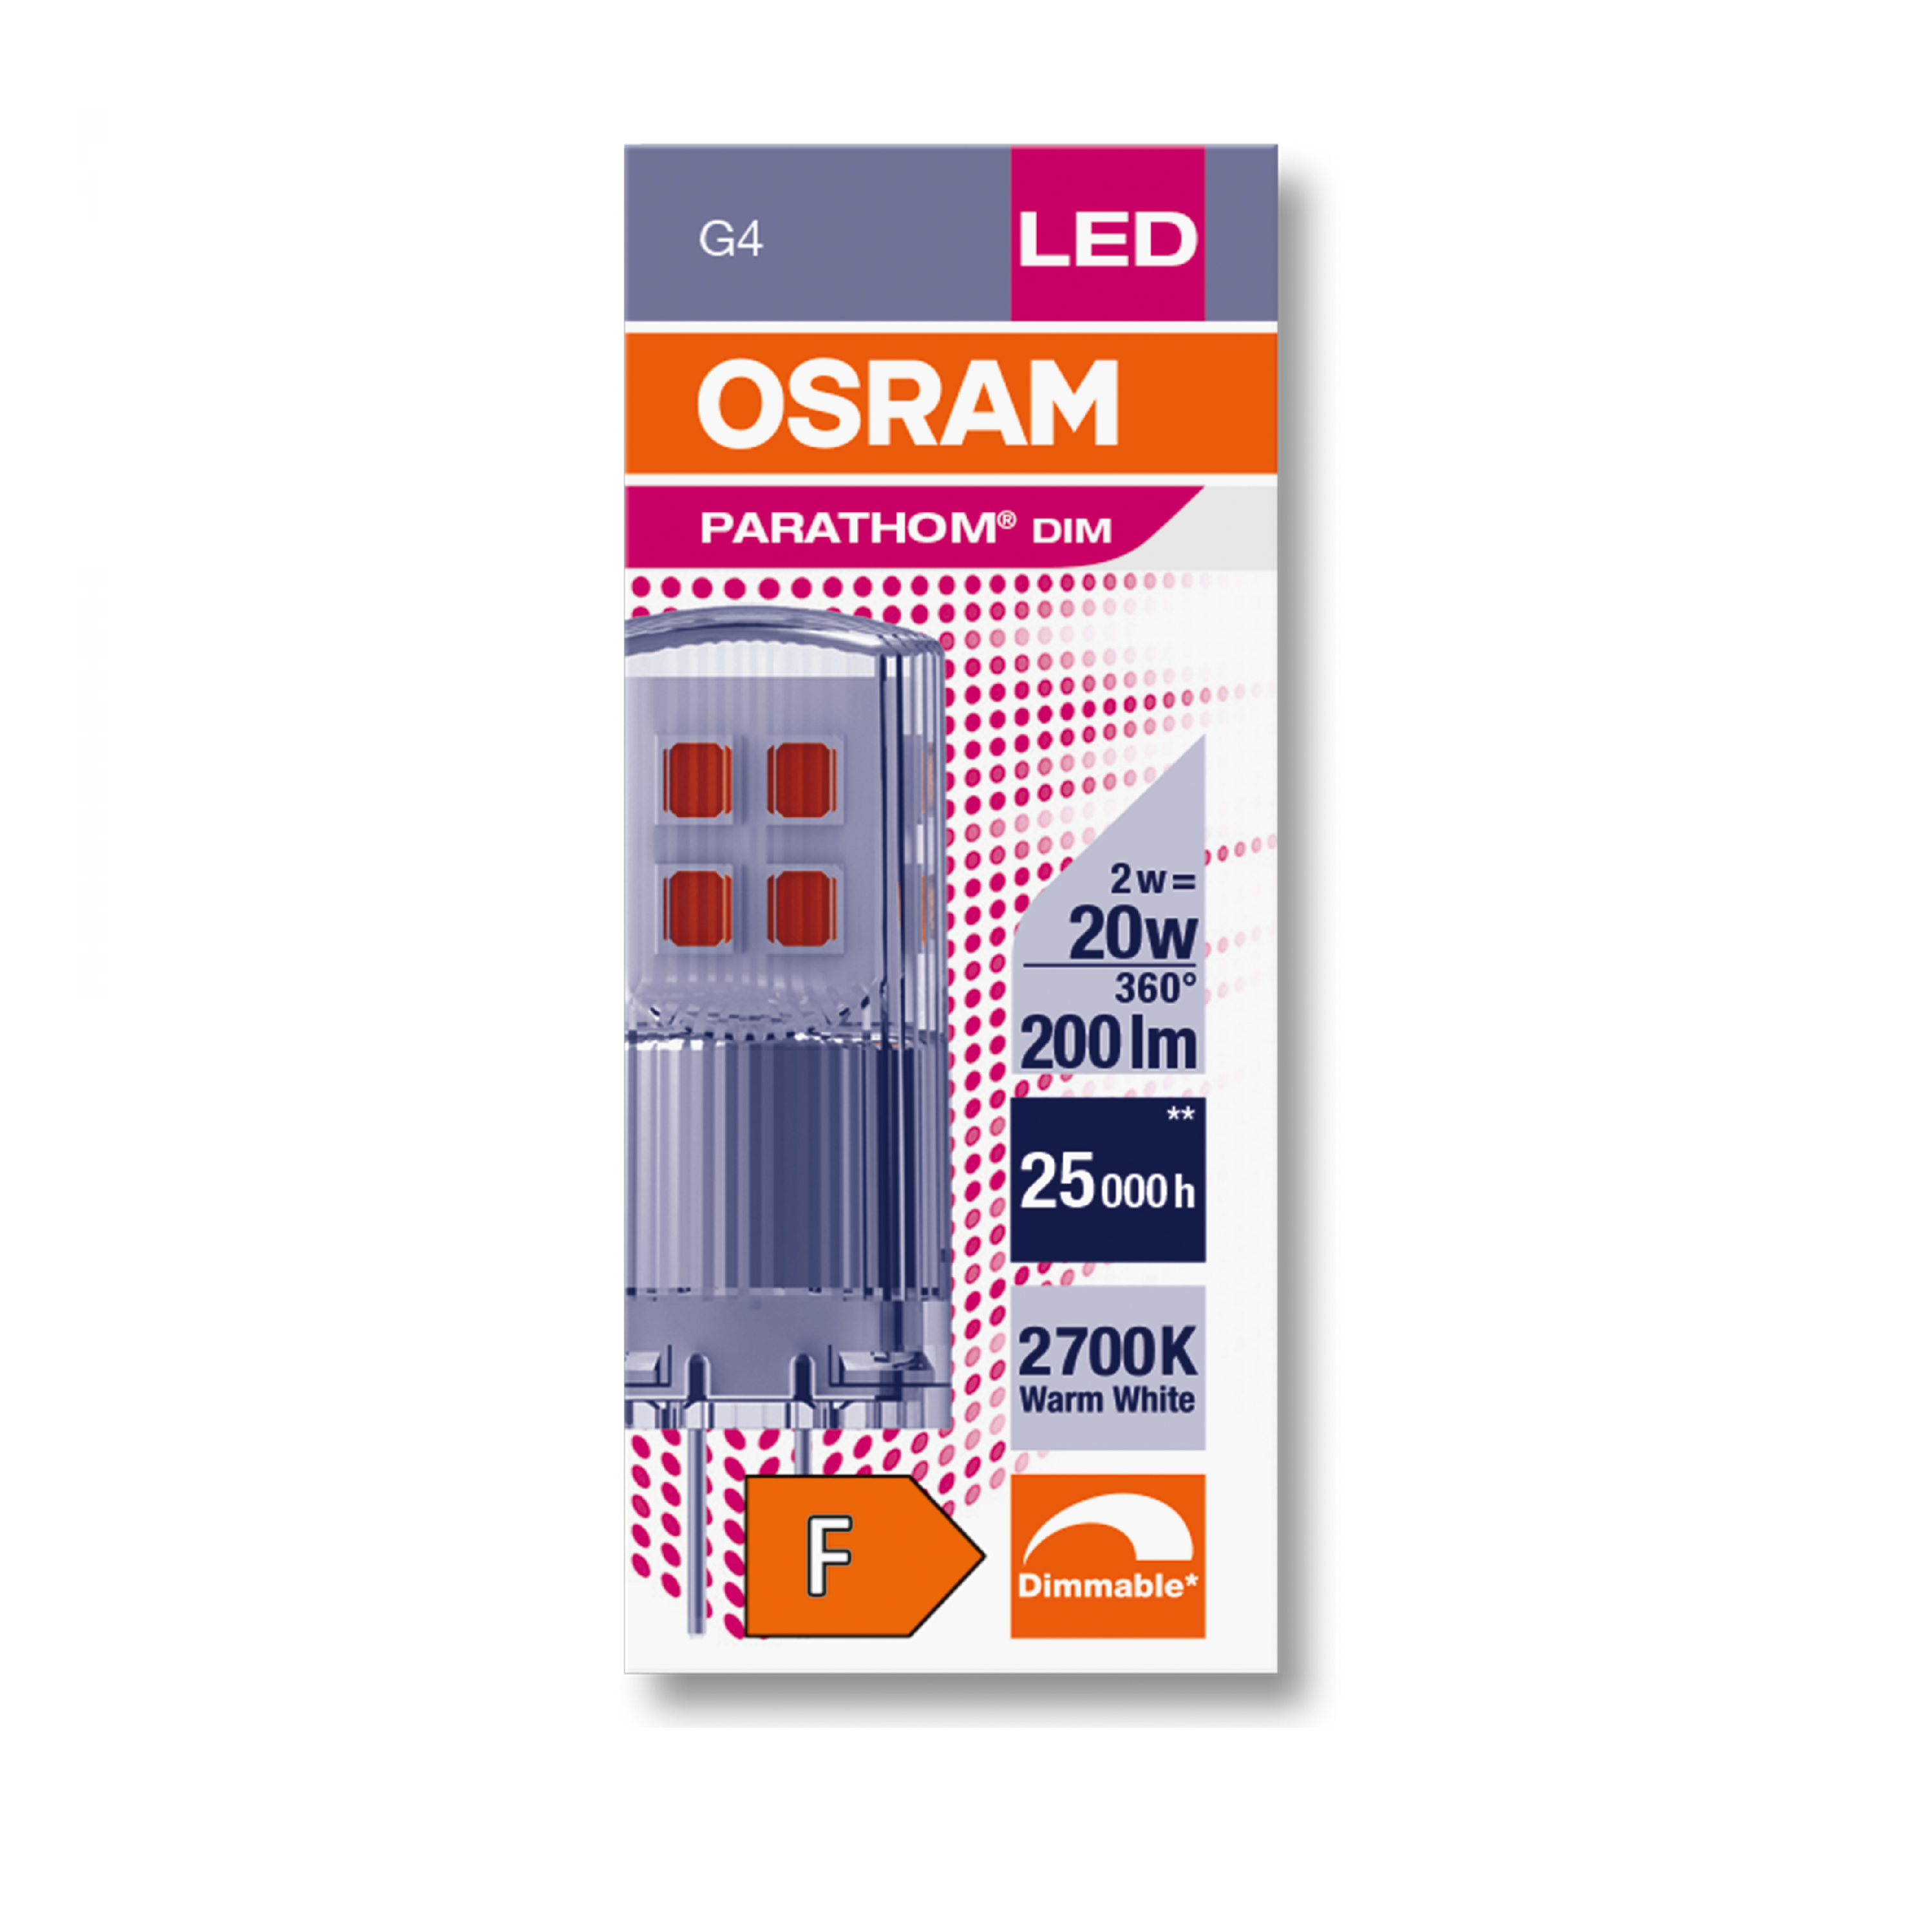 Osram Parathom LED PIN G4 12V 2W 200 LUMENS 827 Warm White DIMMABLE Replaces 20W